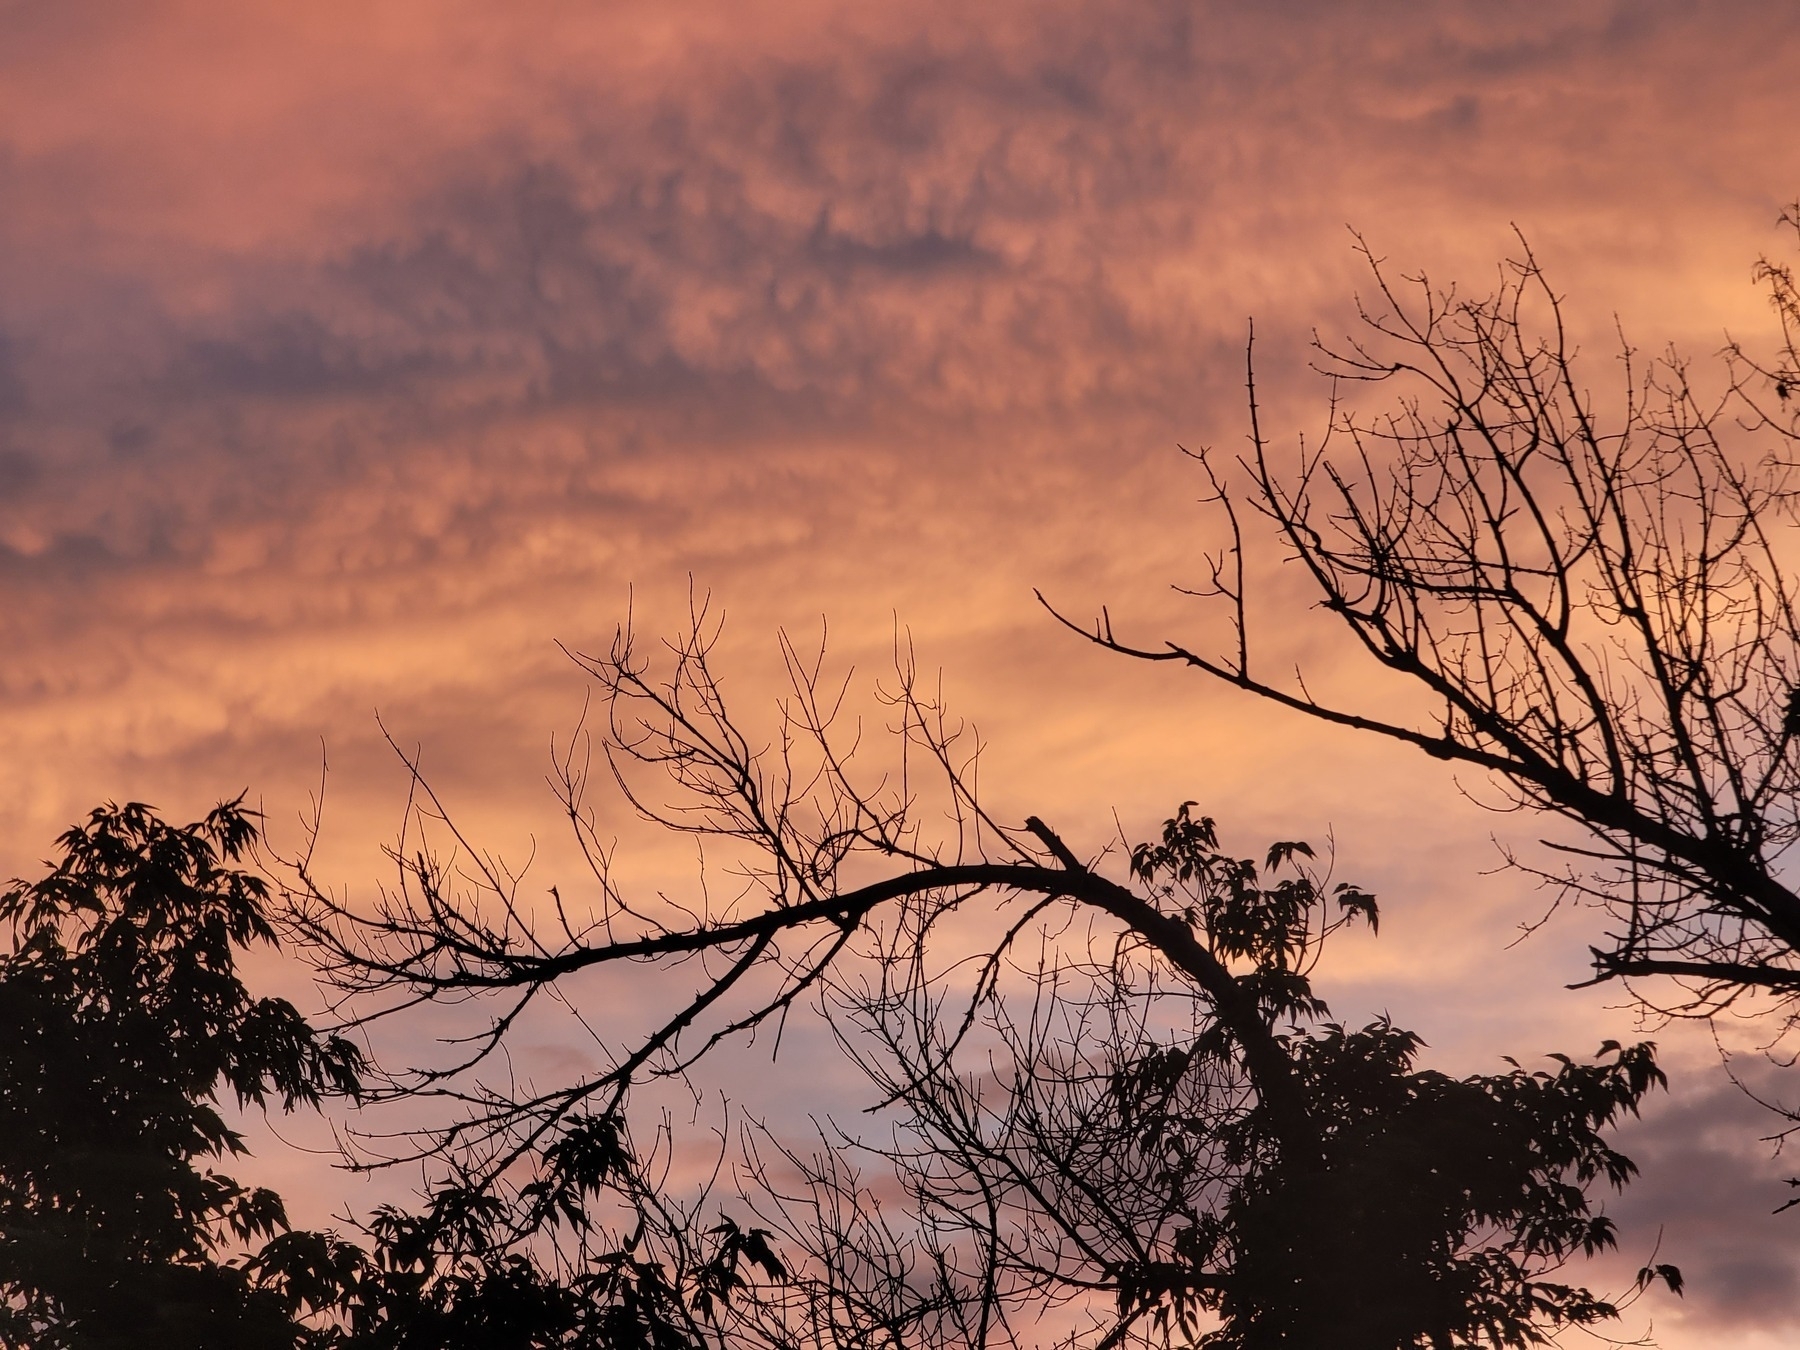 two black tree silhouettes against a cloudy, pale pink sunset